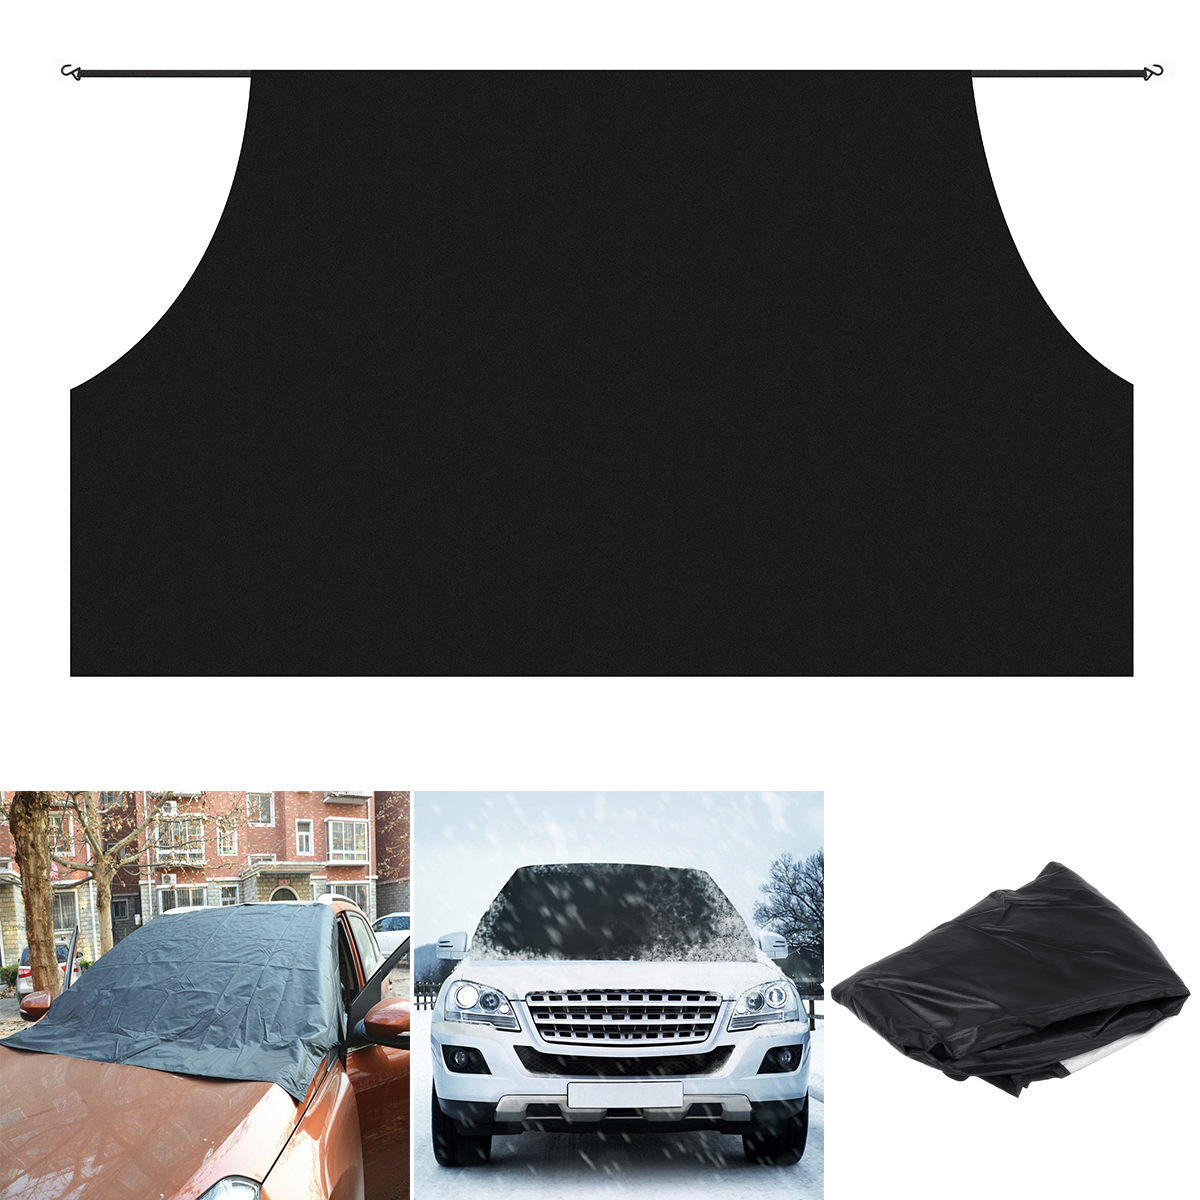 Magnet Windshield Snow Cover Ice Protector Winter Summer Sun Shade for Car Truck